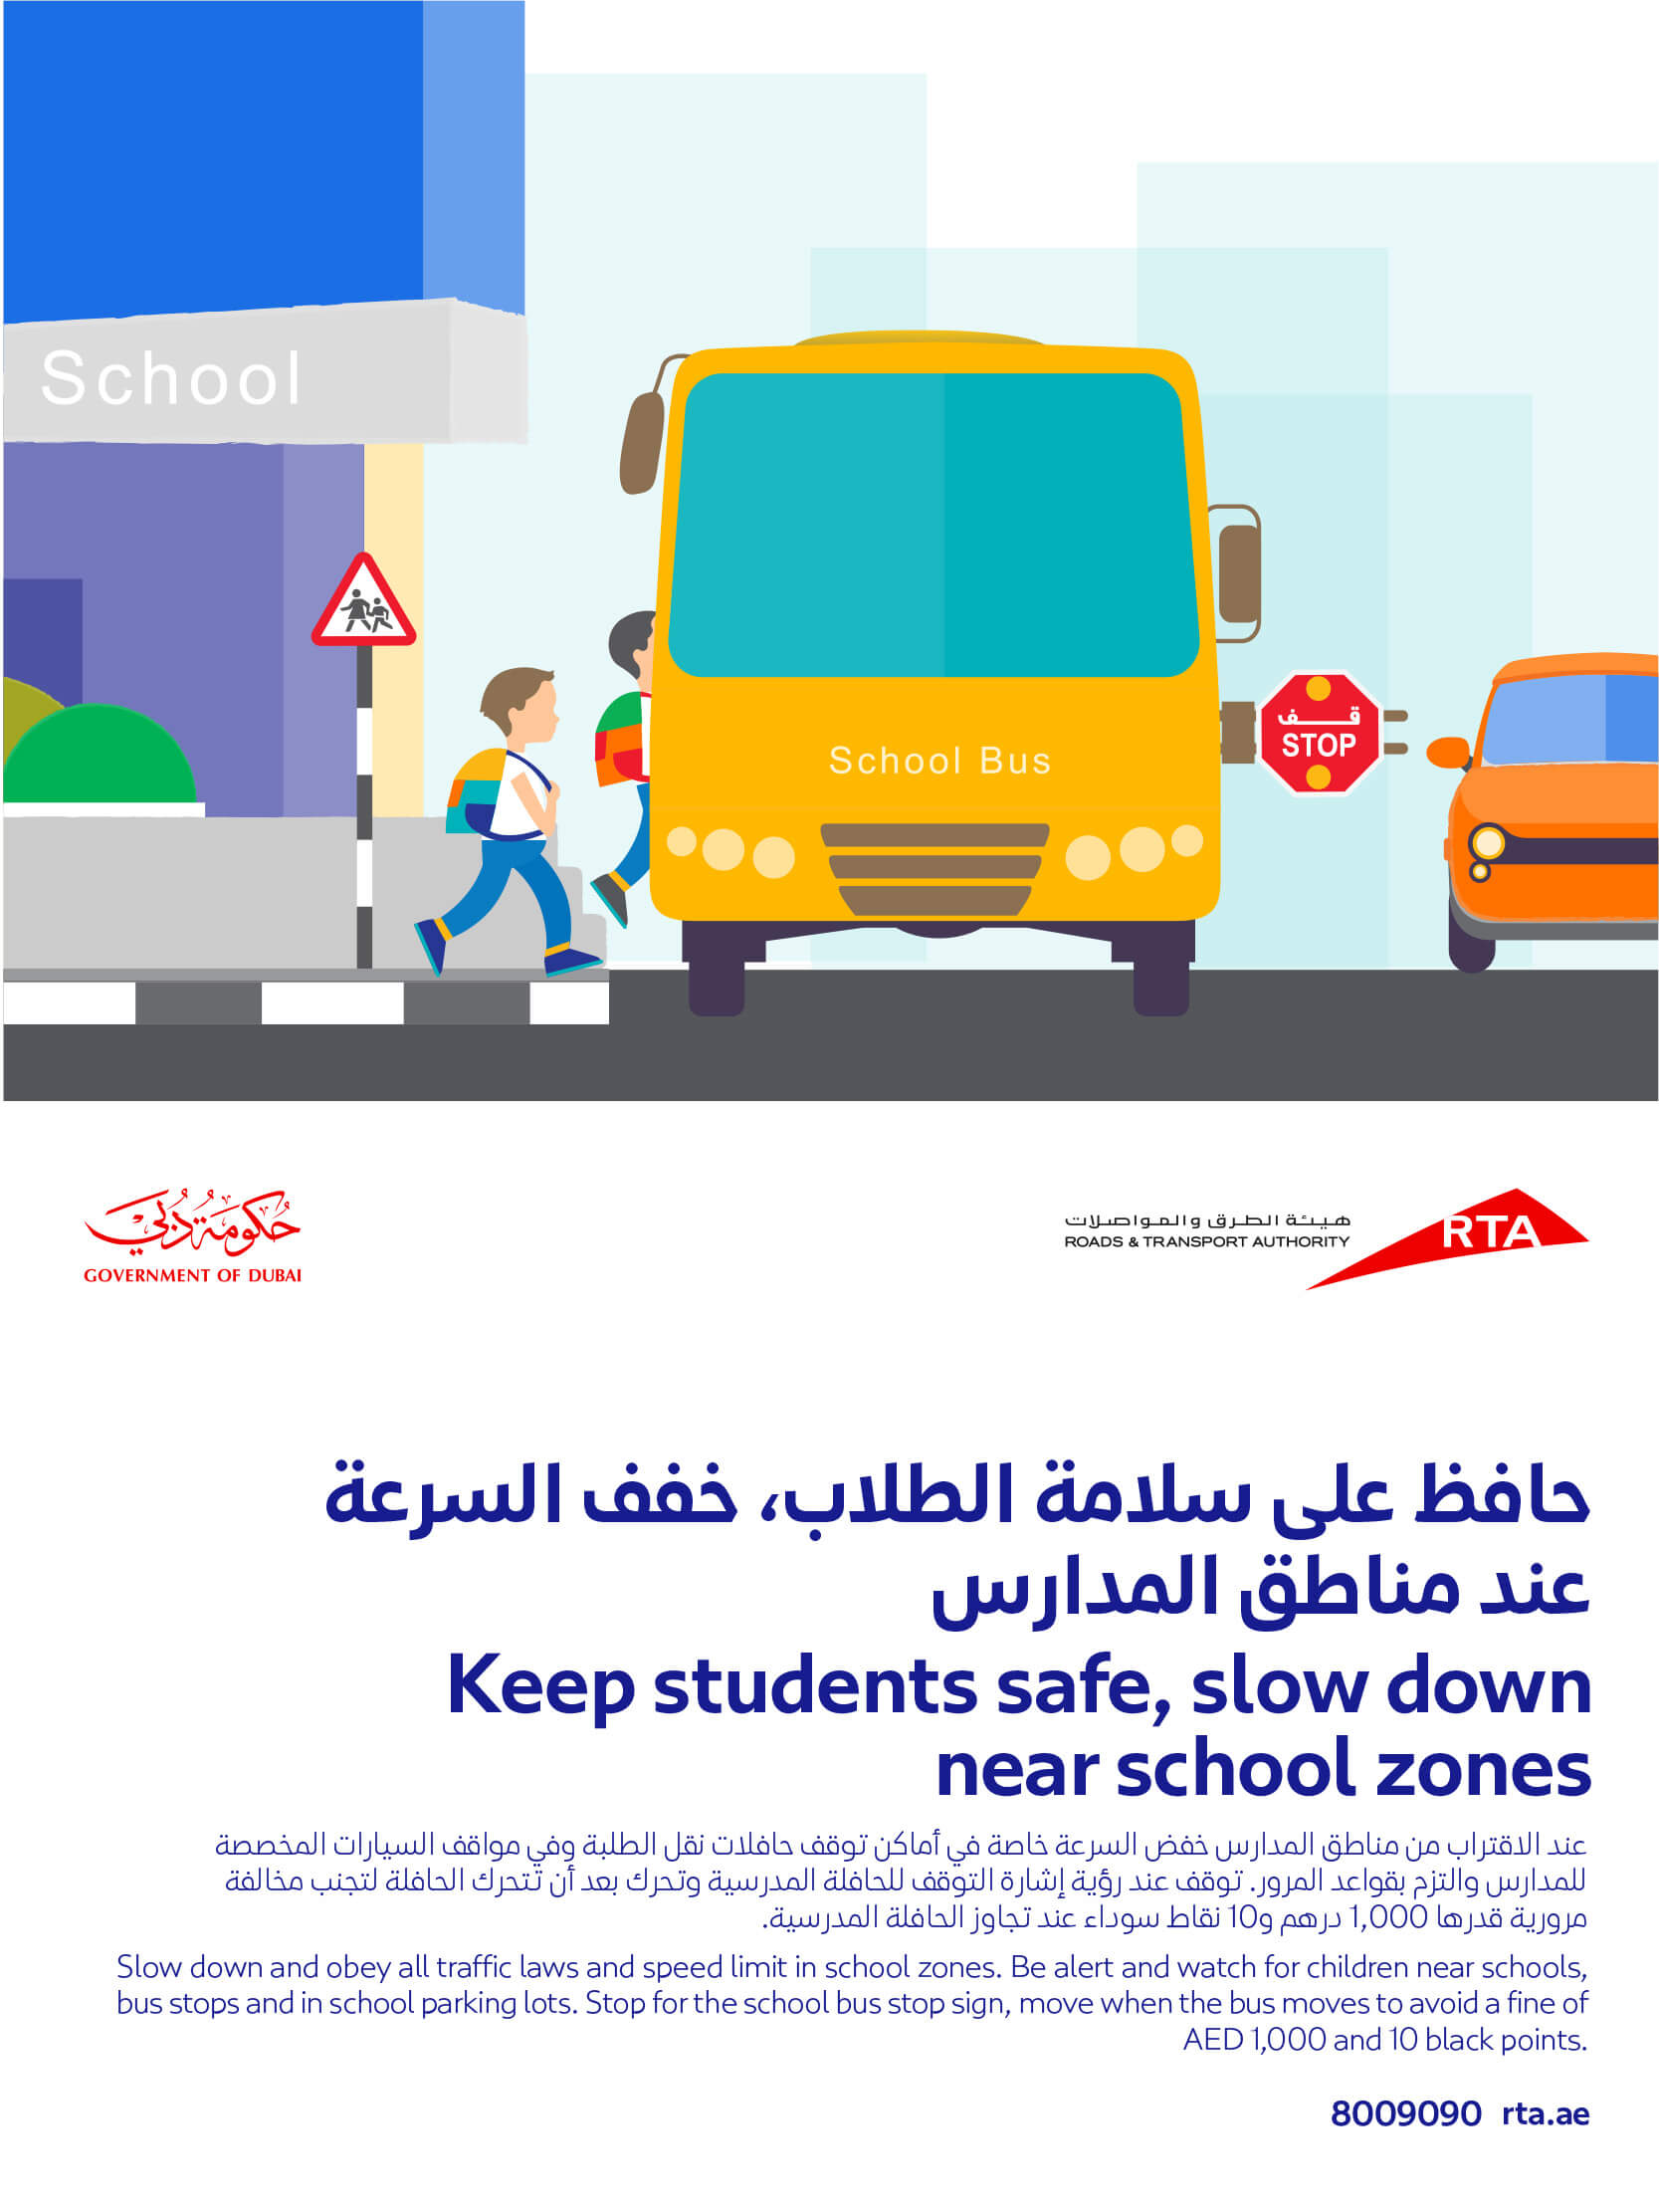 All-RTA-Road-Safety-RTA-websites-for-General-600x800 (2)